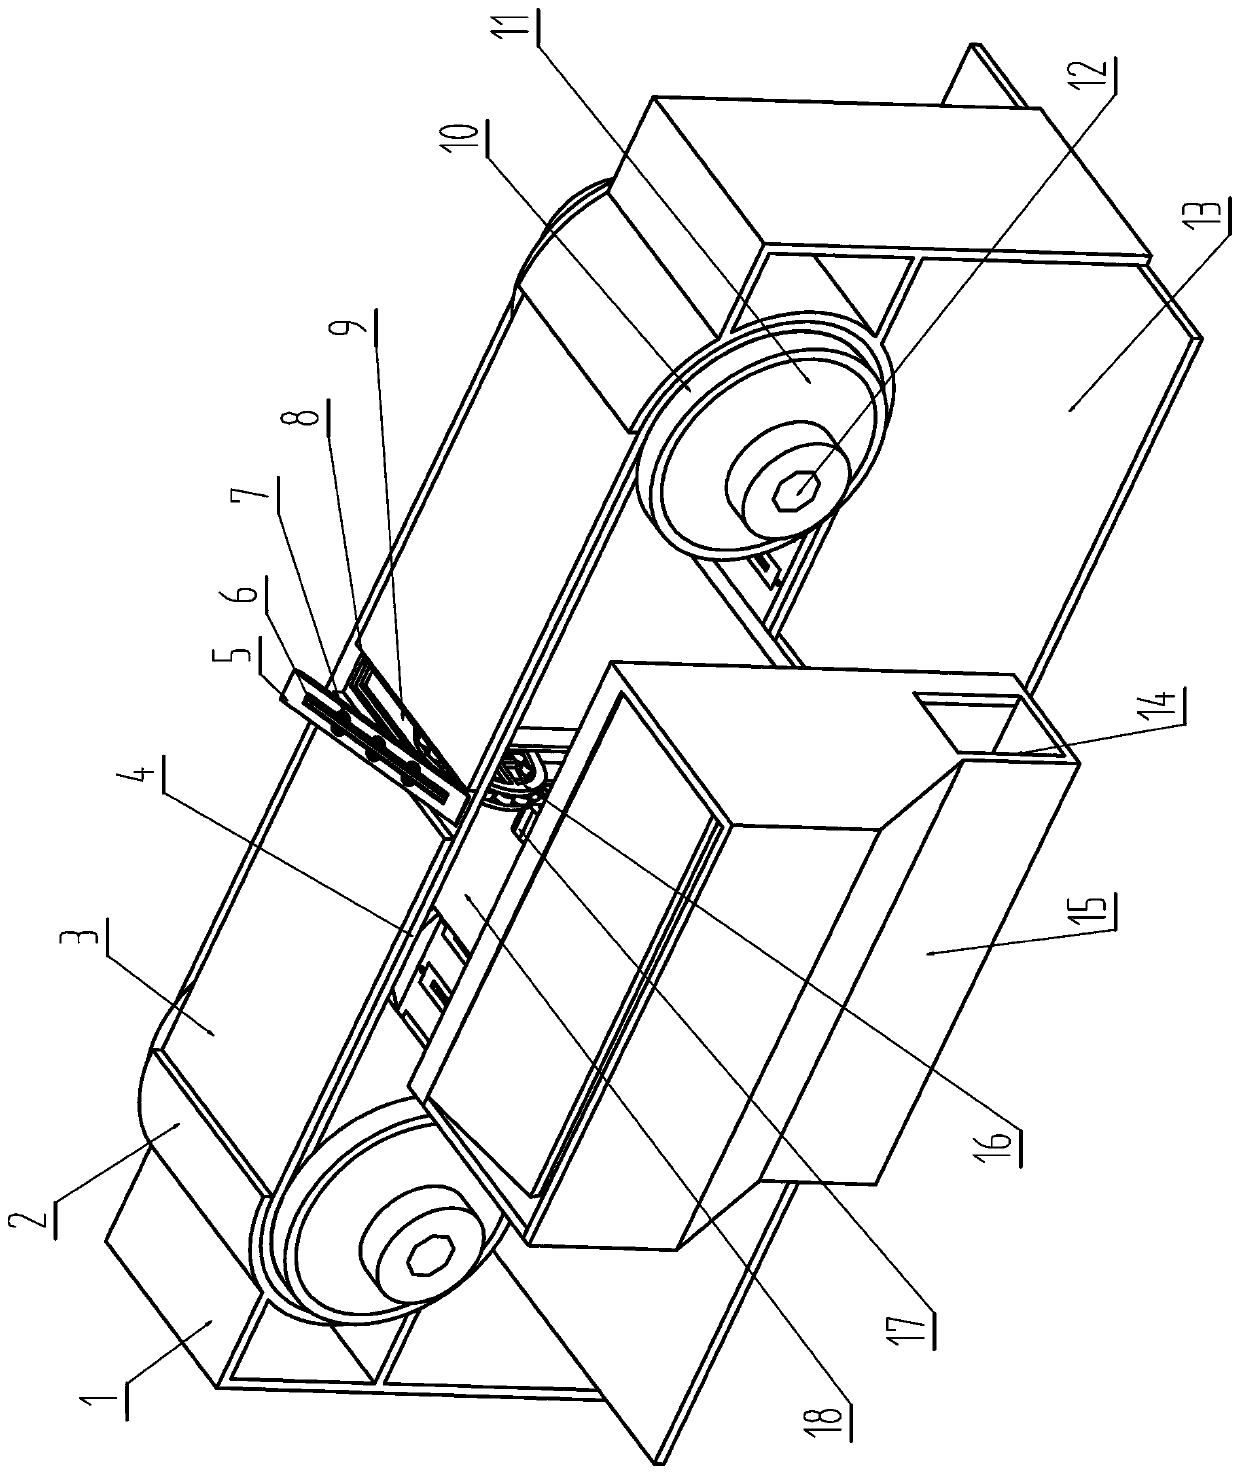 Device for collecting and recovering surgical tools